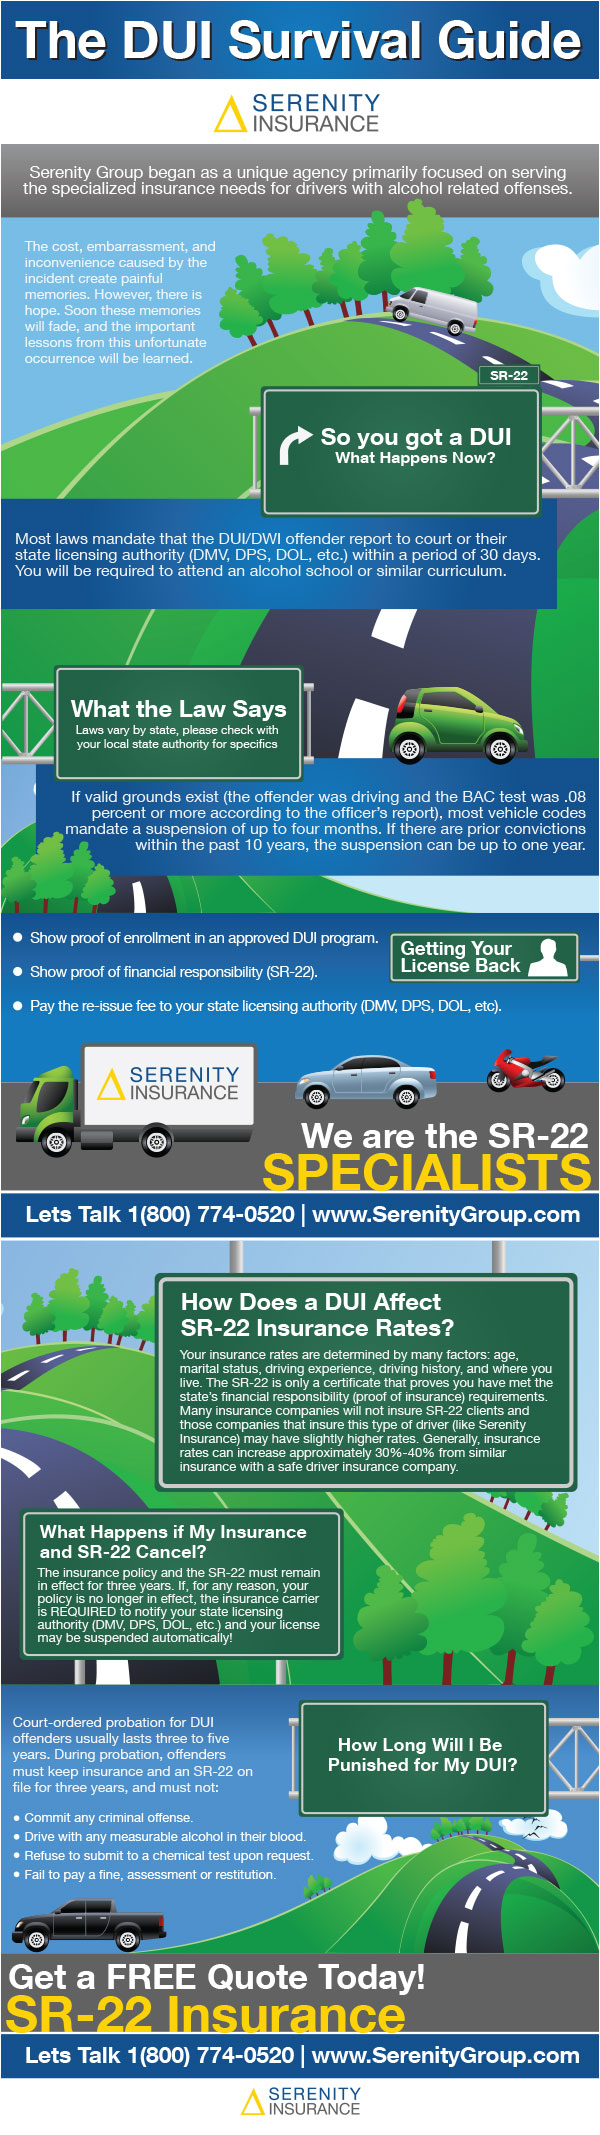 The DUI Survival Guide